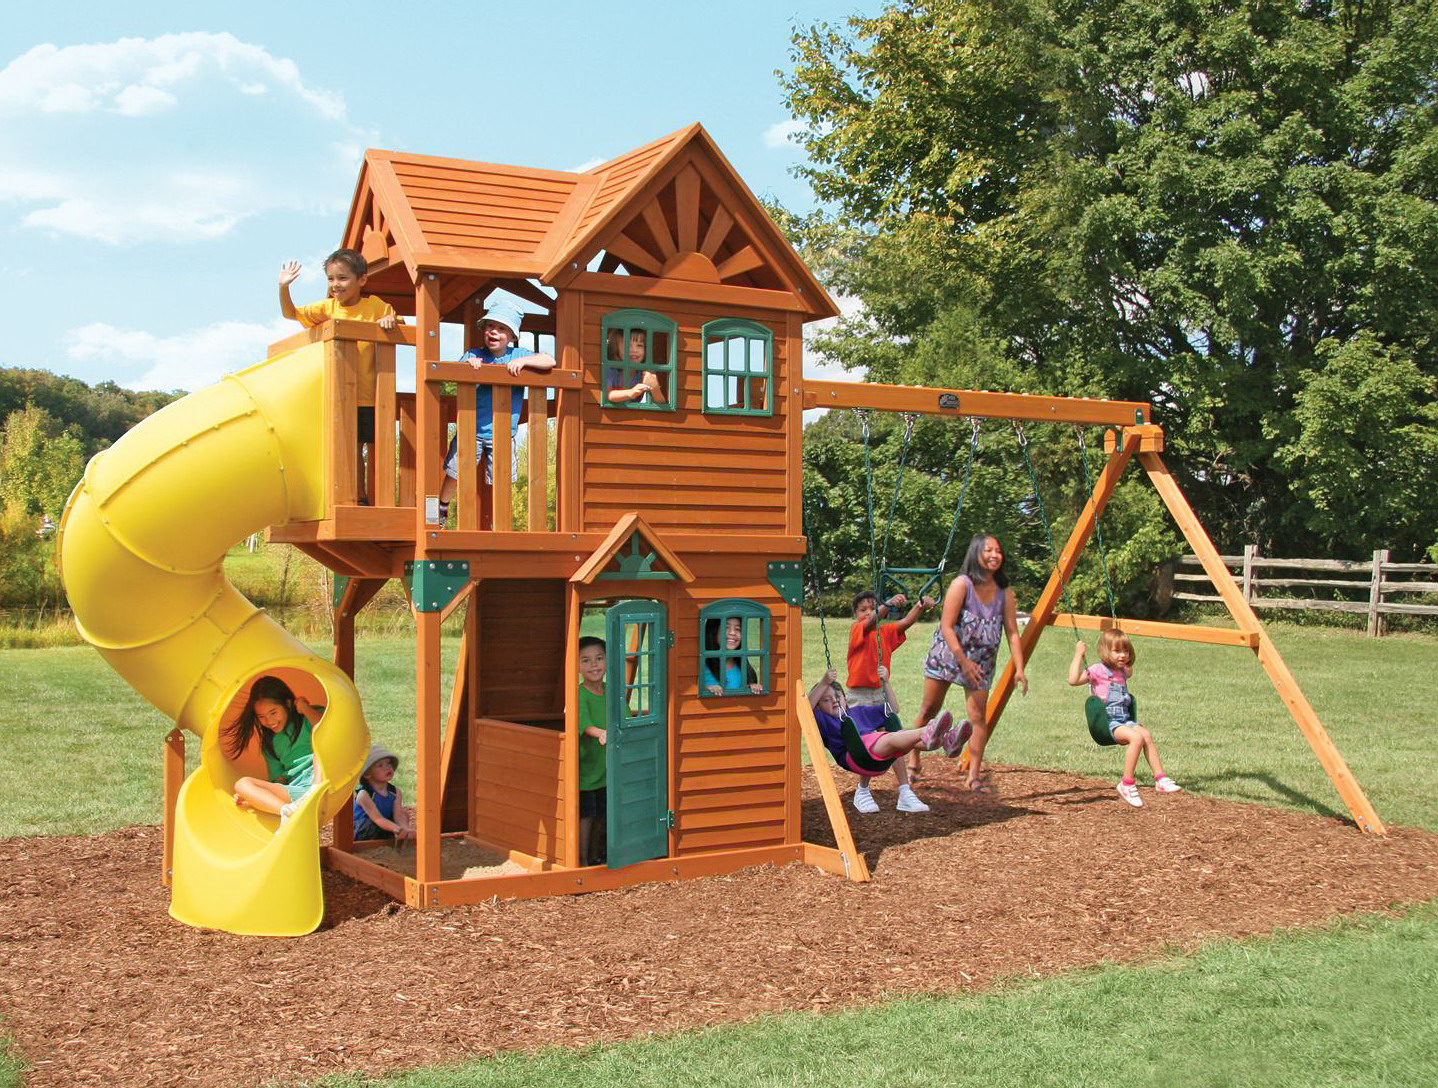 New Giant Outdoor Wood Playground Play Set Wooden Kid's ...